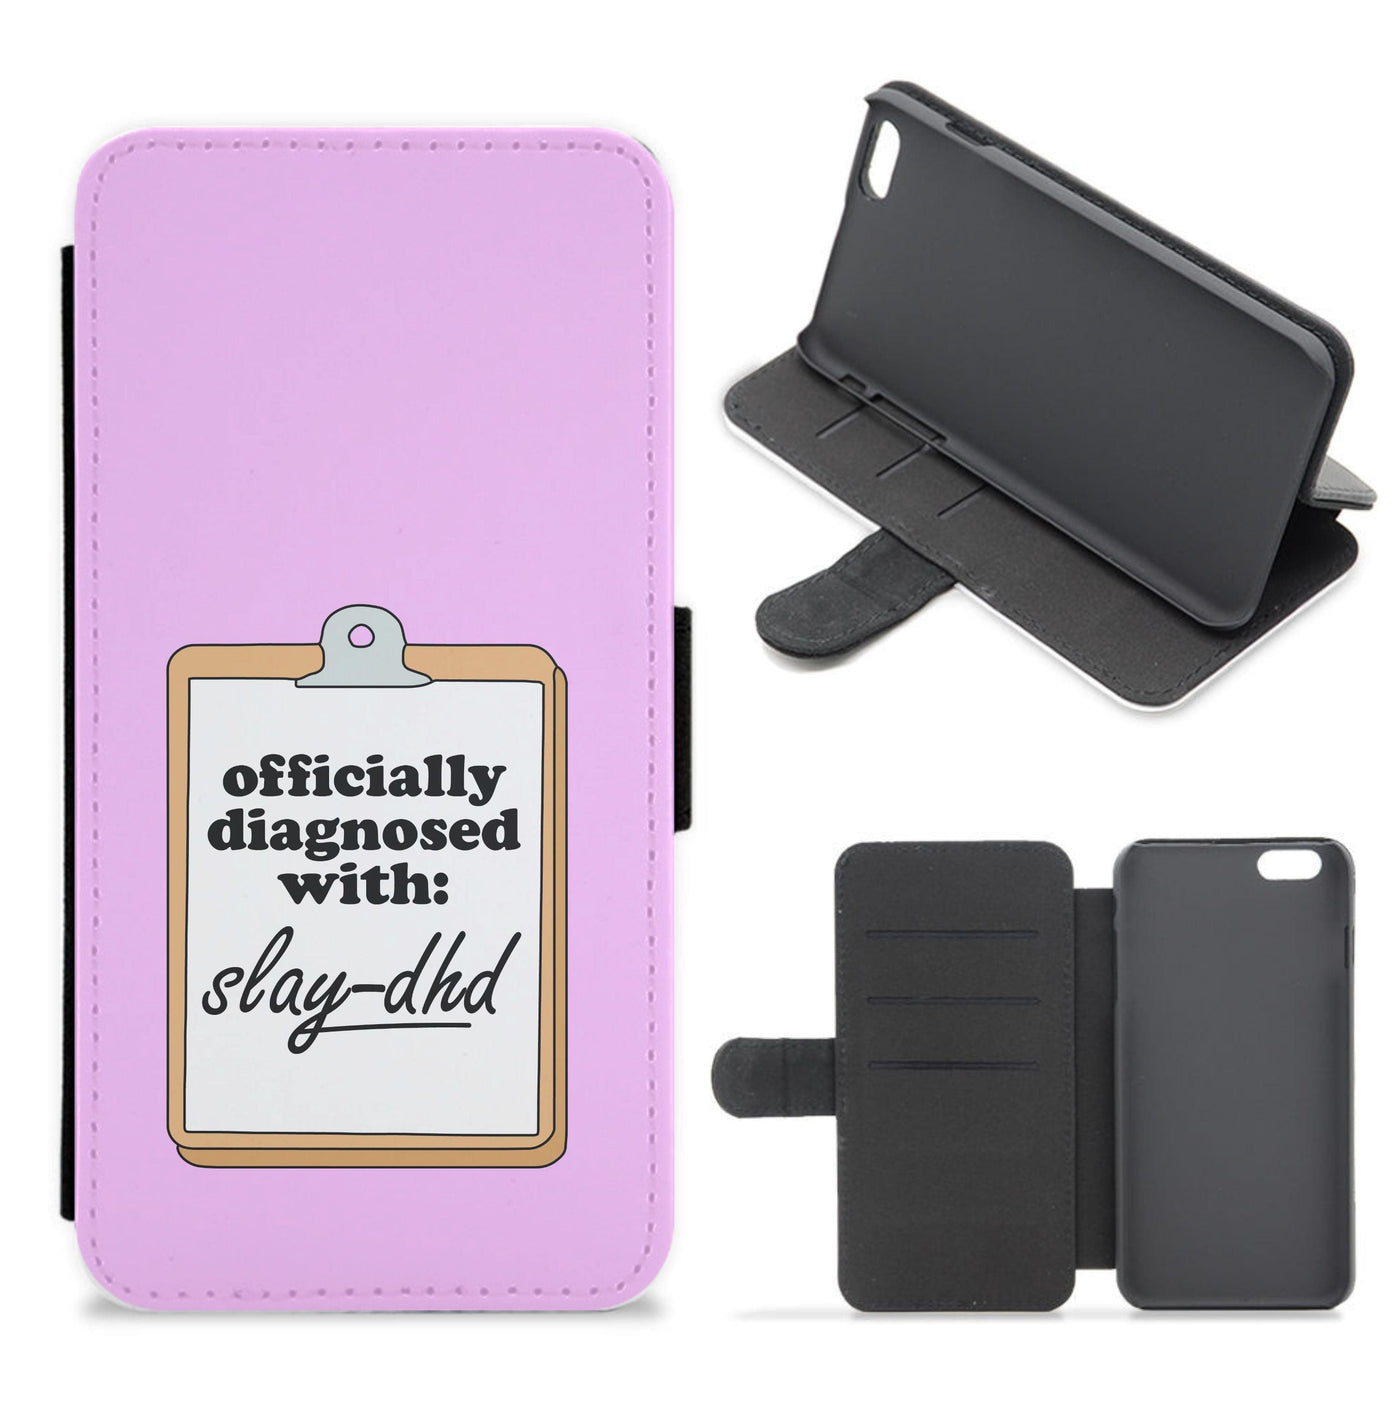 Diagnosed With Slay-DHD - TikTok Trends Flip / Wallet Phone Case